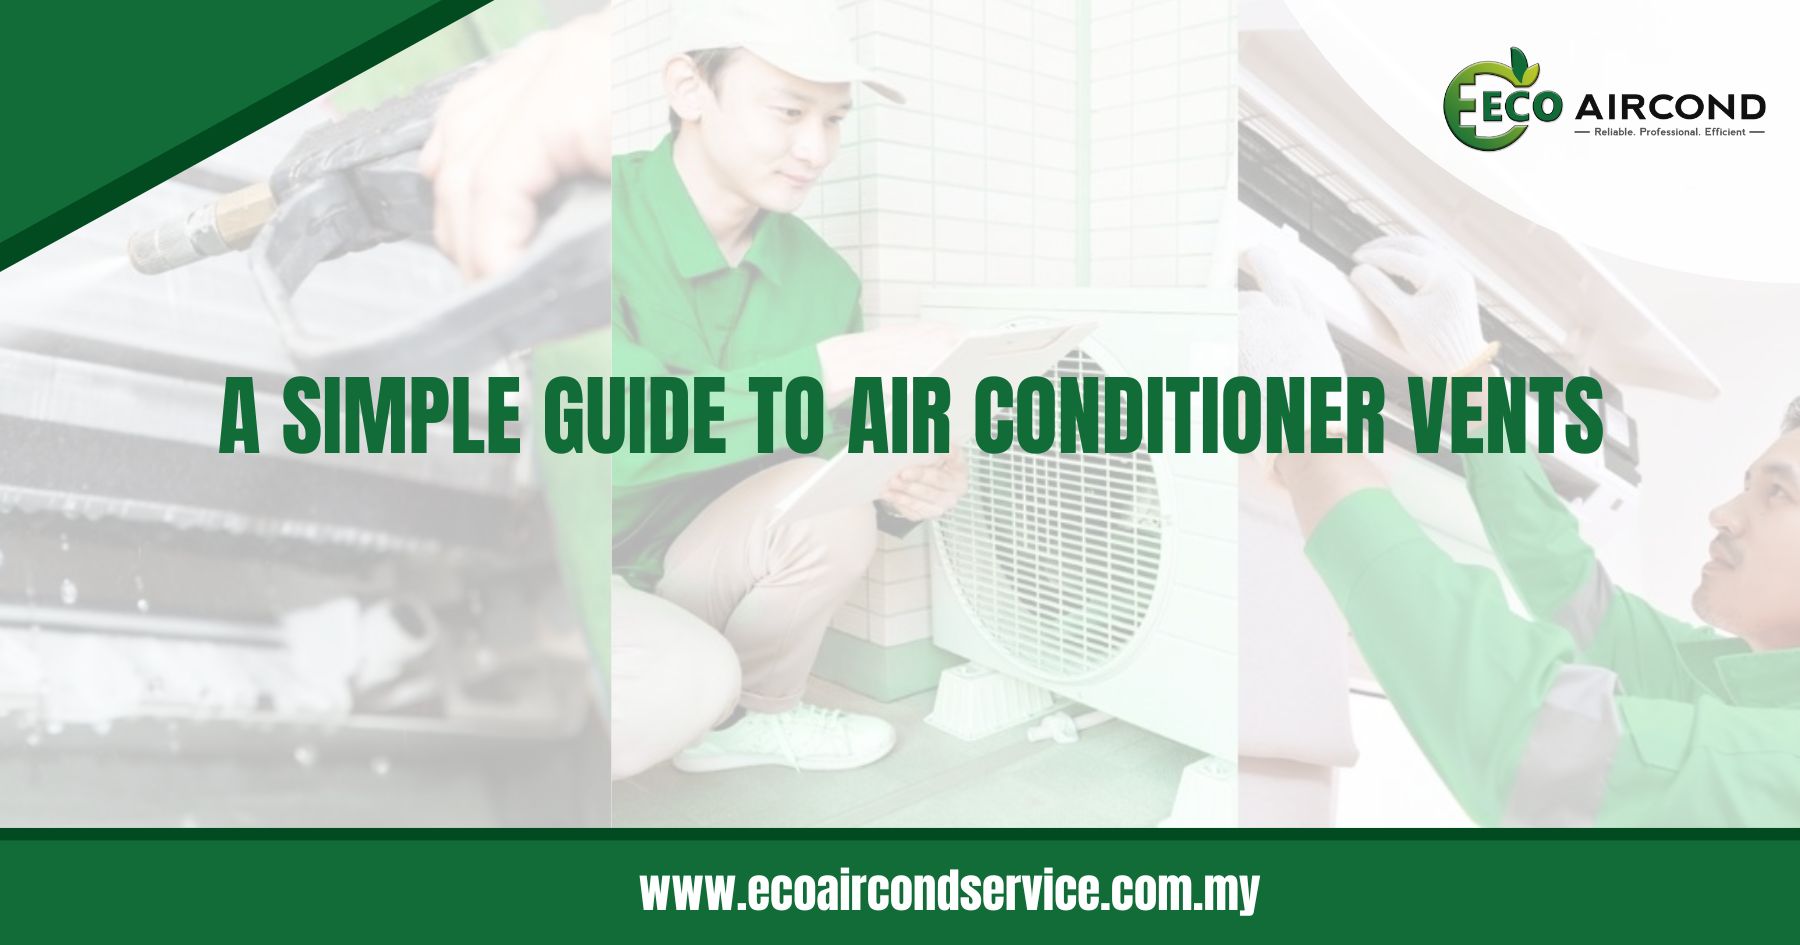 A Simple Guide to Air Conditioner Vents